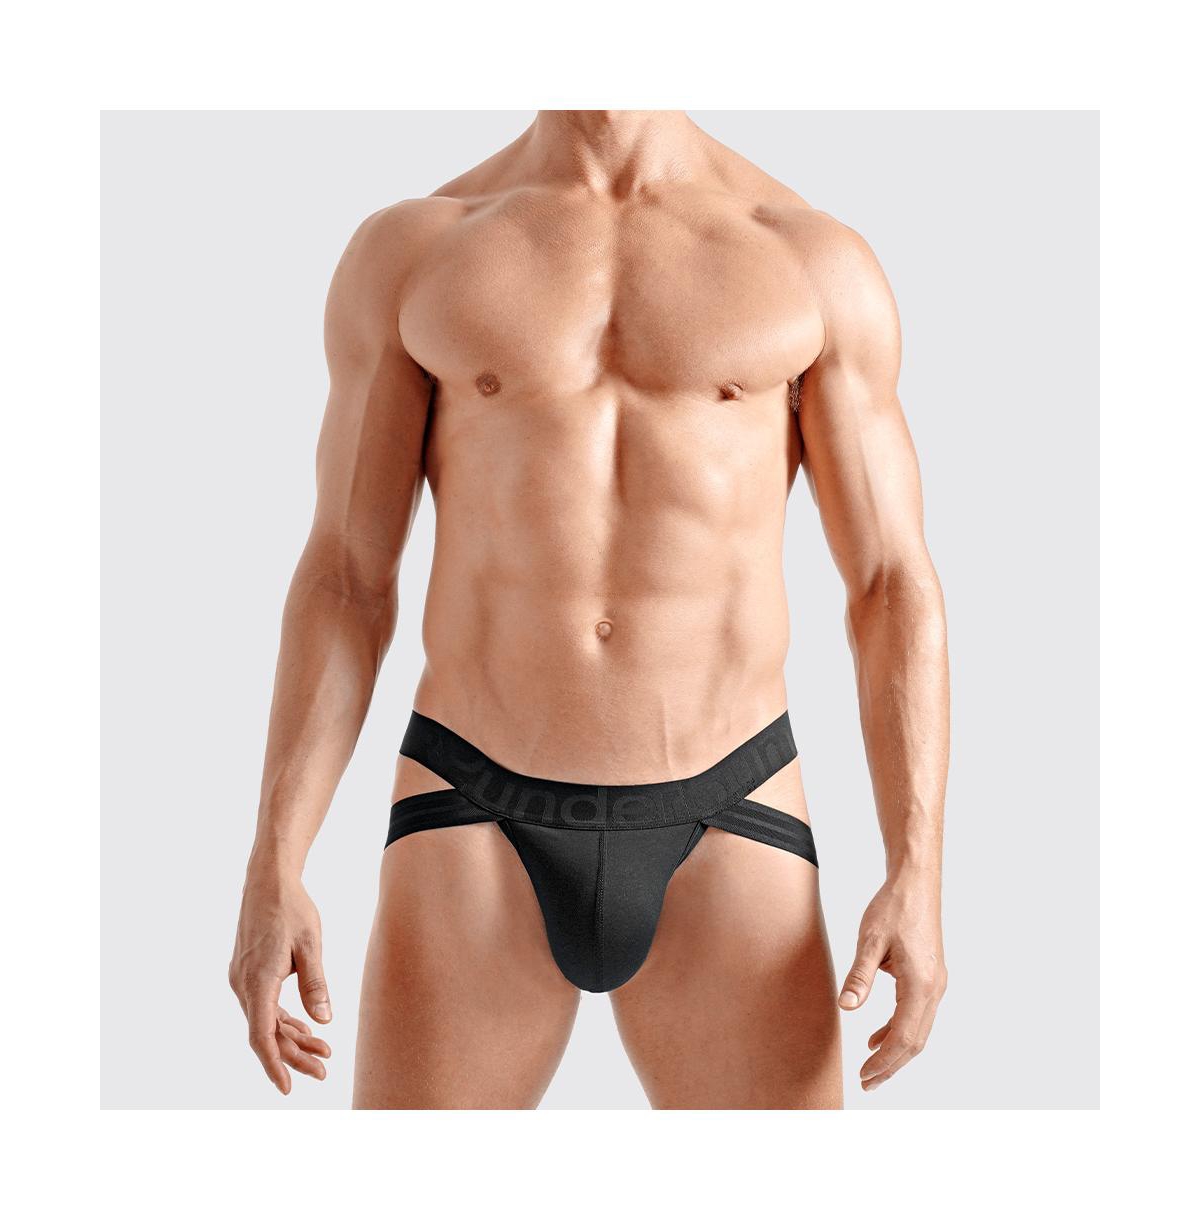 Calvin Klein 3-pack jockstraps with colored waistband in black